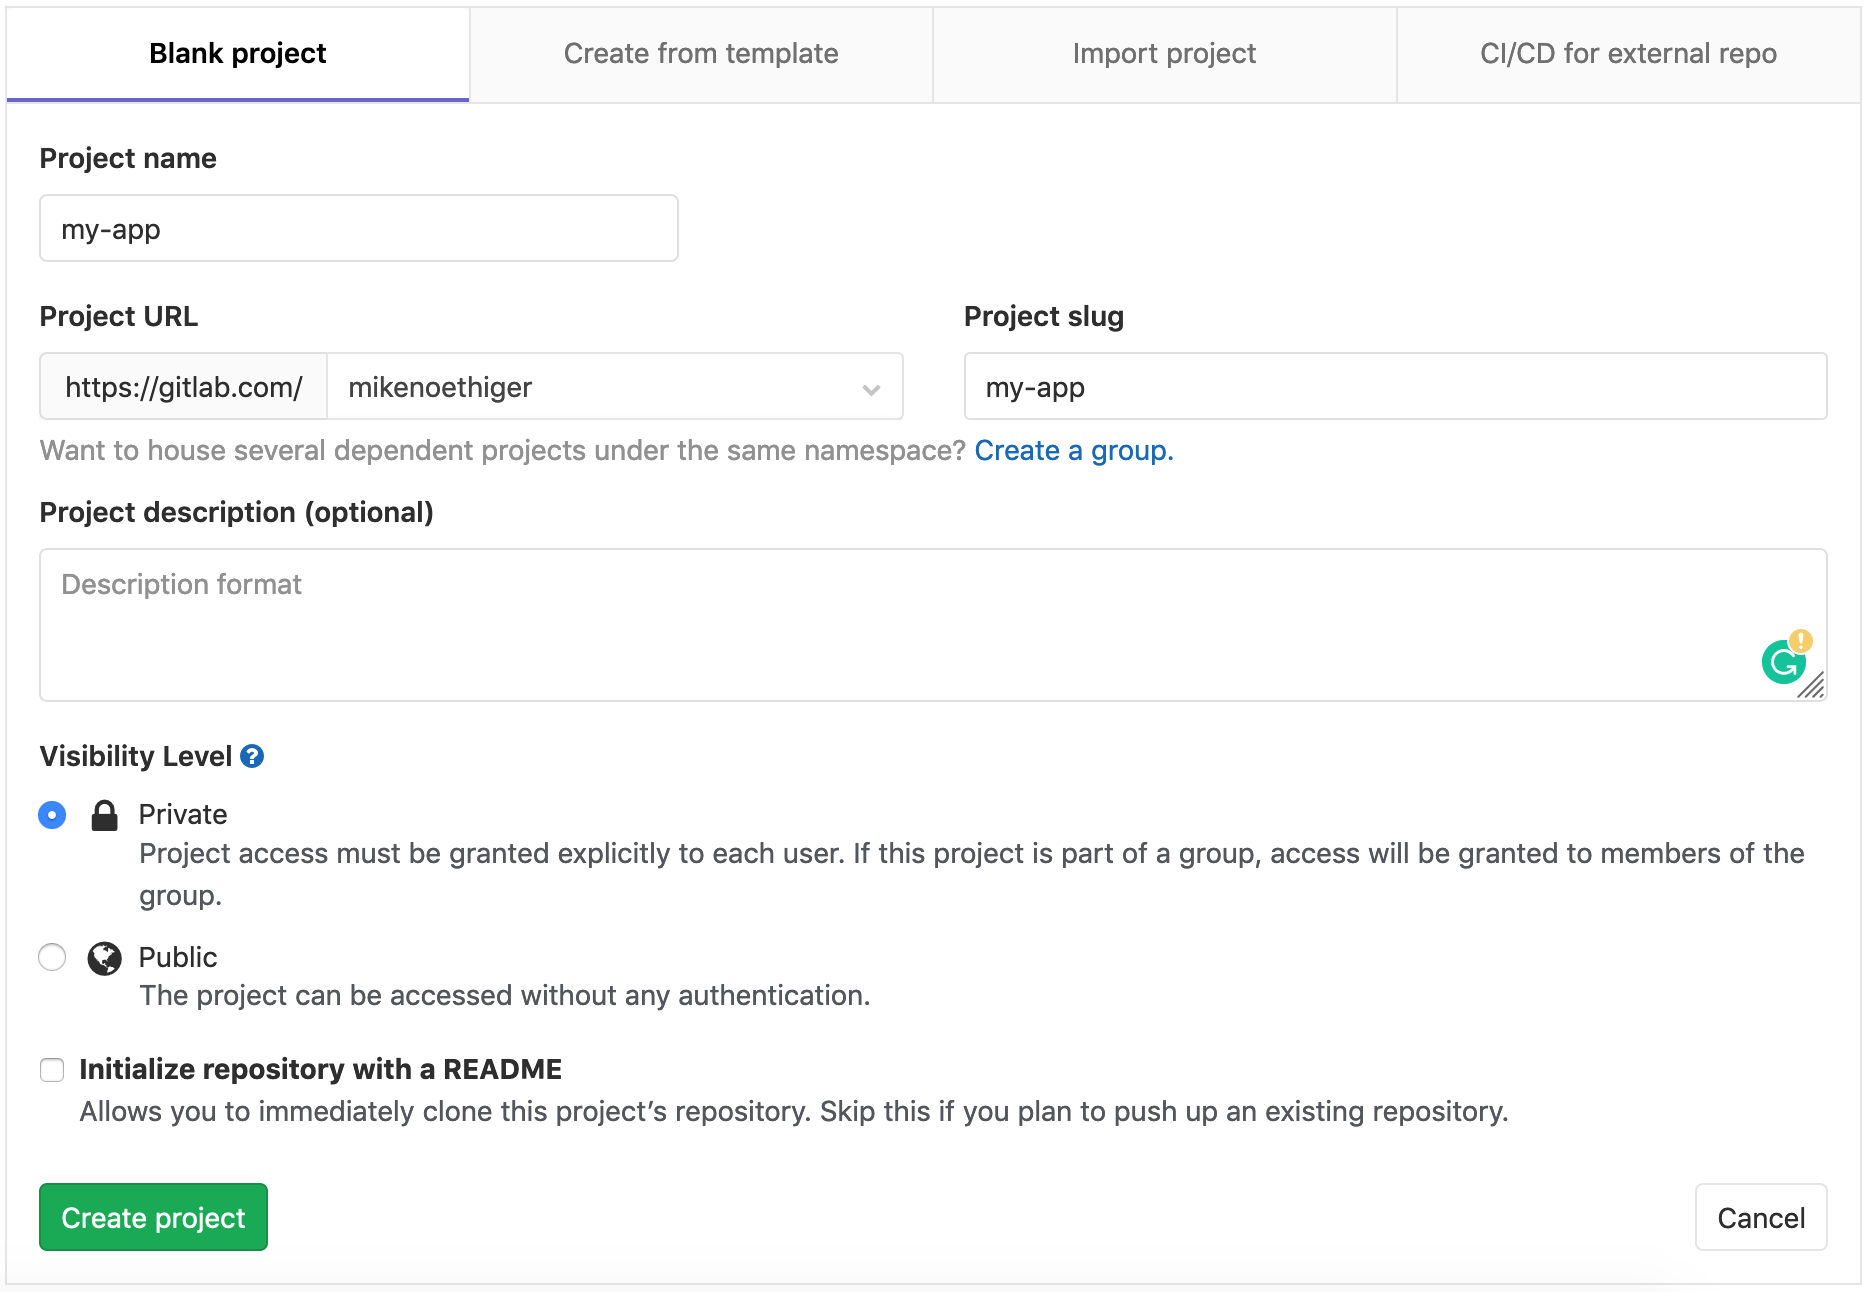 The new project form in GitLab